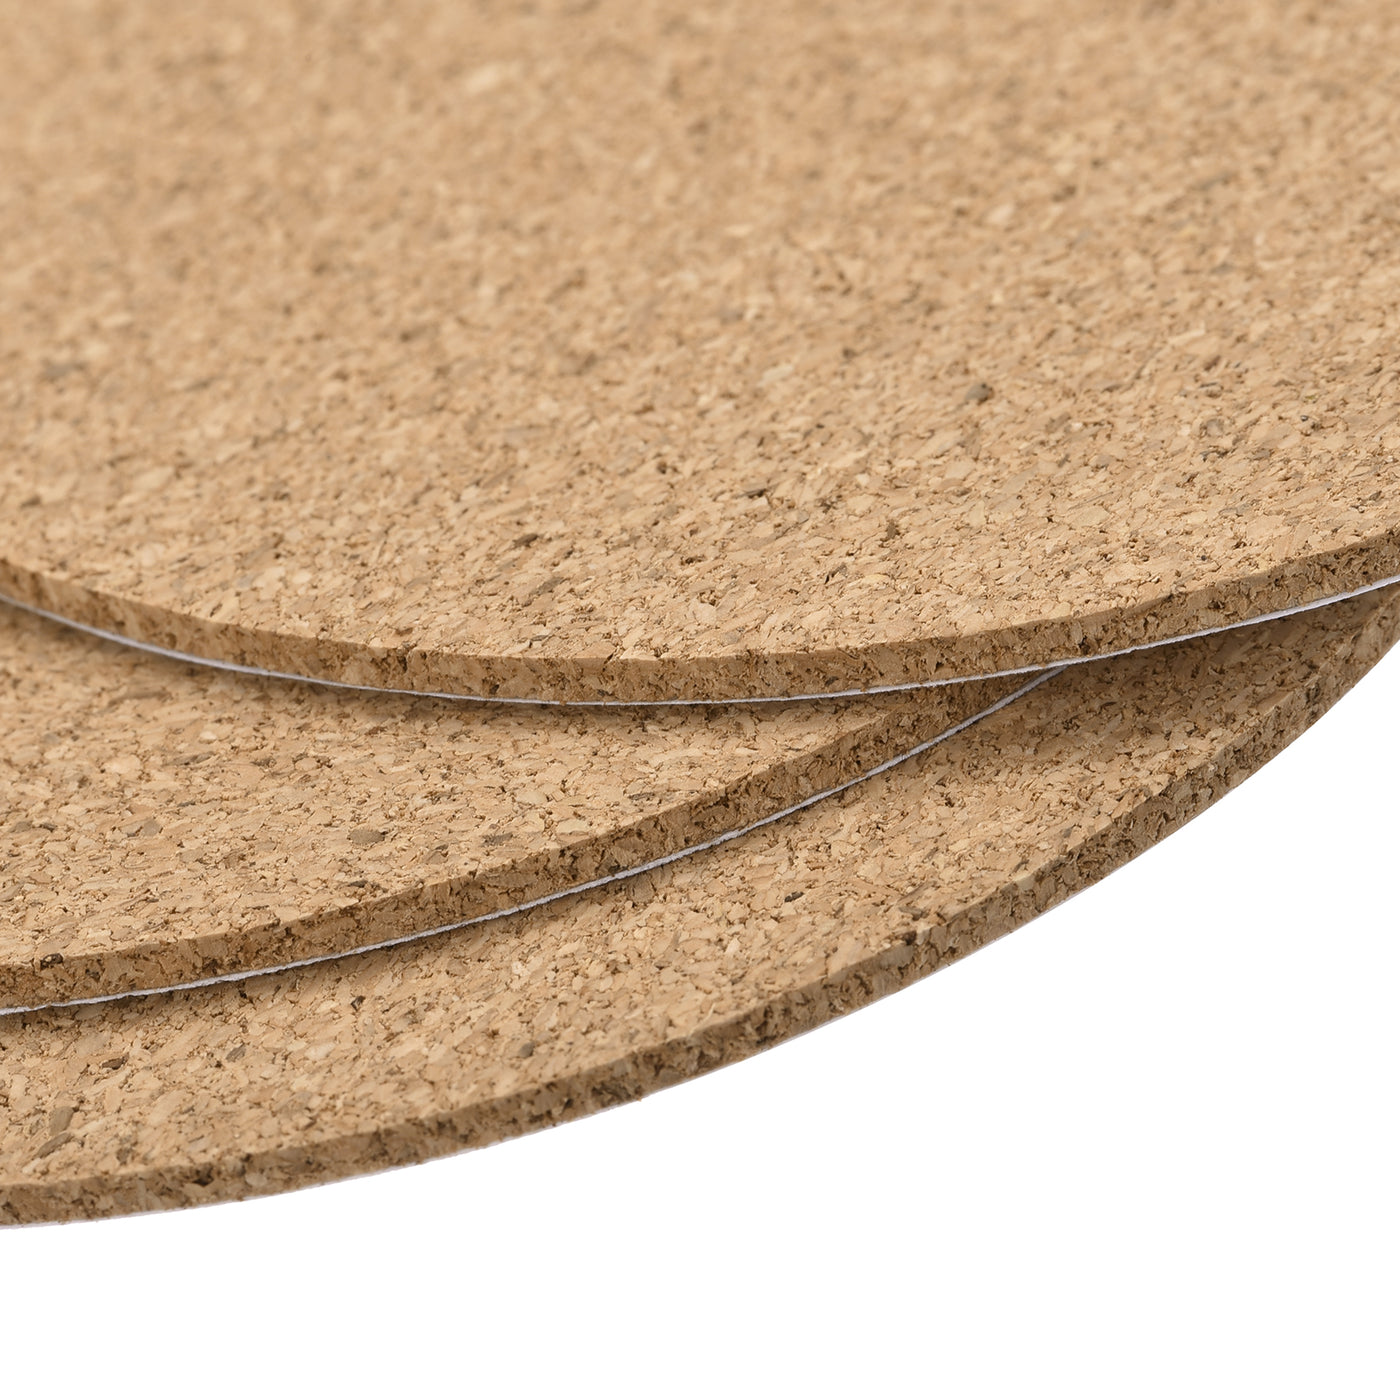 uxcell Uxcell 90mm(3.54") Round Coasters 3mm Thick Cork Cup Mat Pad for Tableware 50pcs